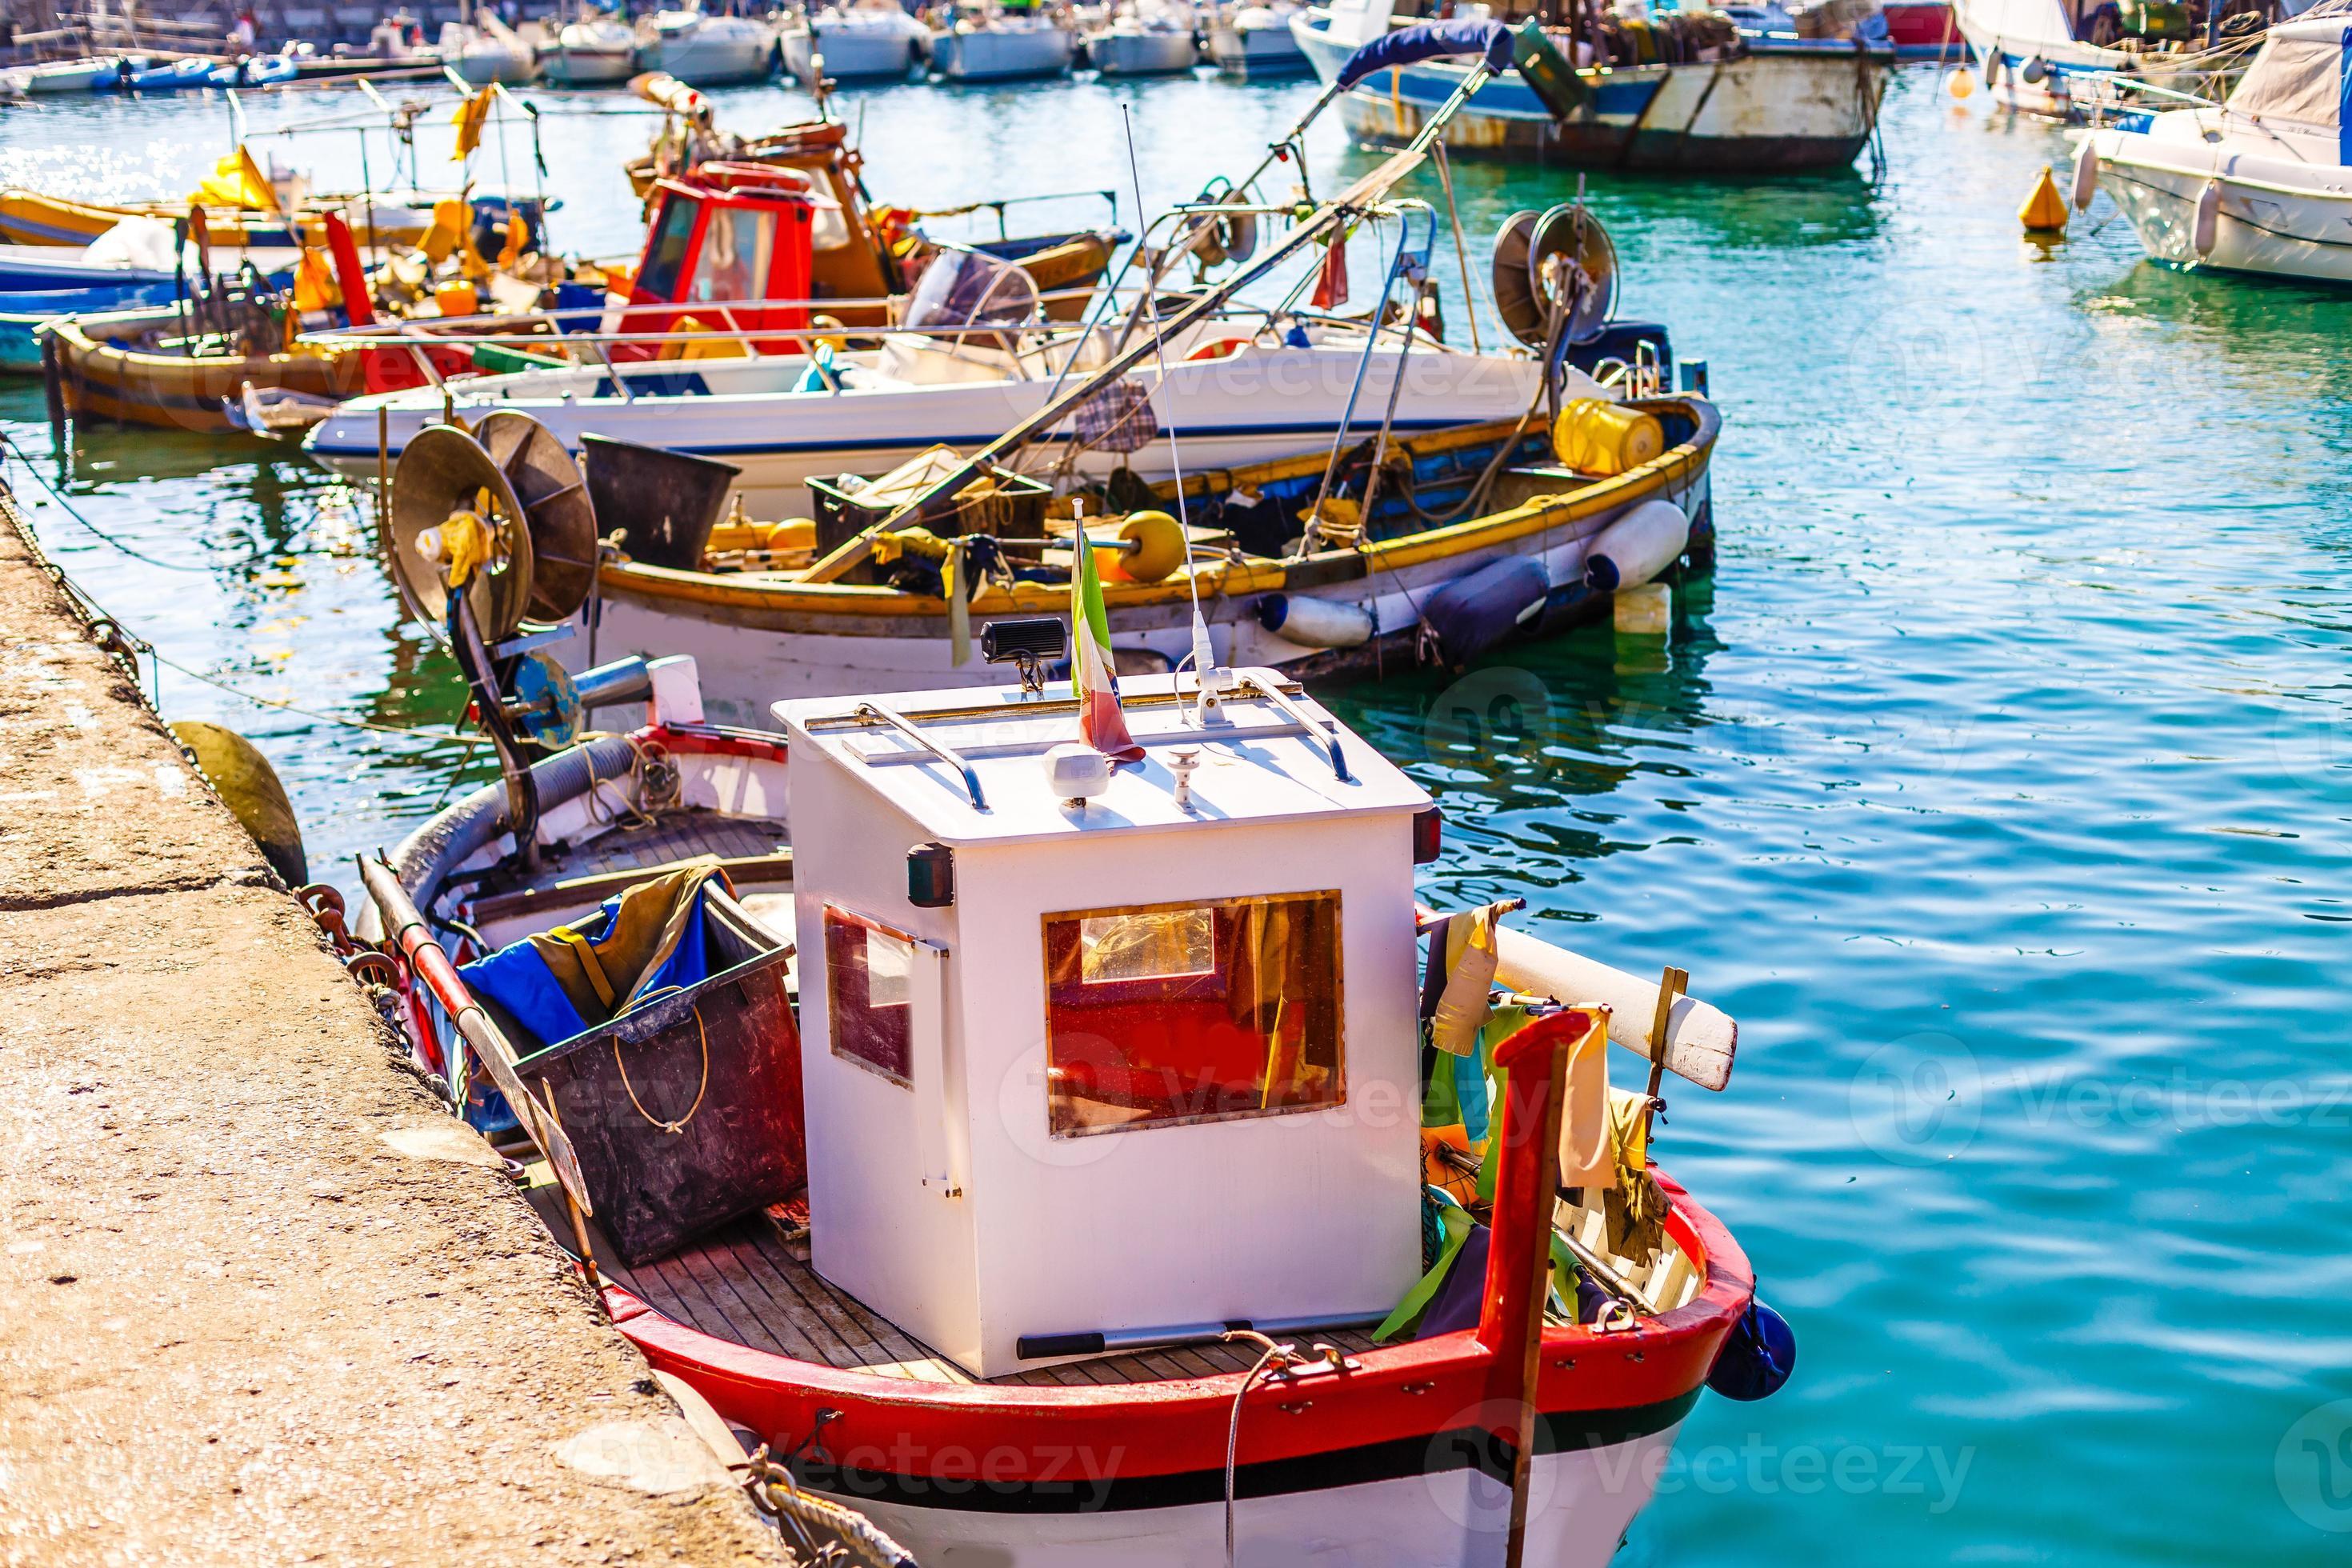 https://static.vecteezy.com/system/resources/previews/016/781/051/large_2x/fishing-boats-in-liguria-italy-small-fishing-boats-with-fishing-equipment-docked-in-the-port-lerici-la-spezia-liguria-italy-photo.jpg